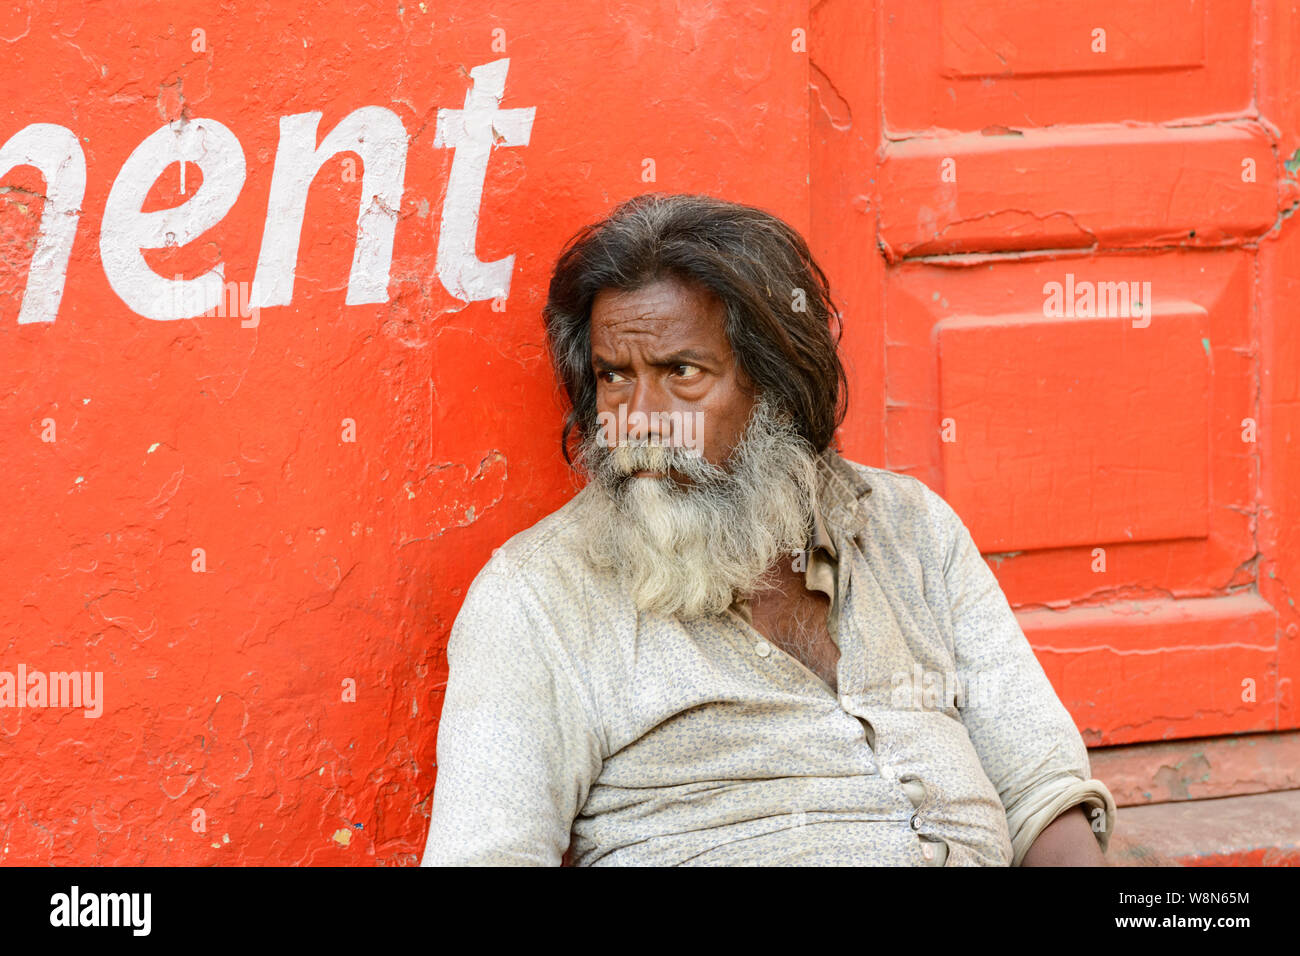 An Indian man sits on the pavement in the backstreets of Varanasi, Uttar Pradesh, India, South Asia. Also known as Benares, Banaras and Kashi. Stock Photo